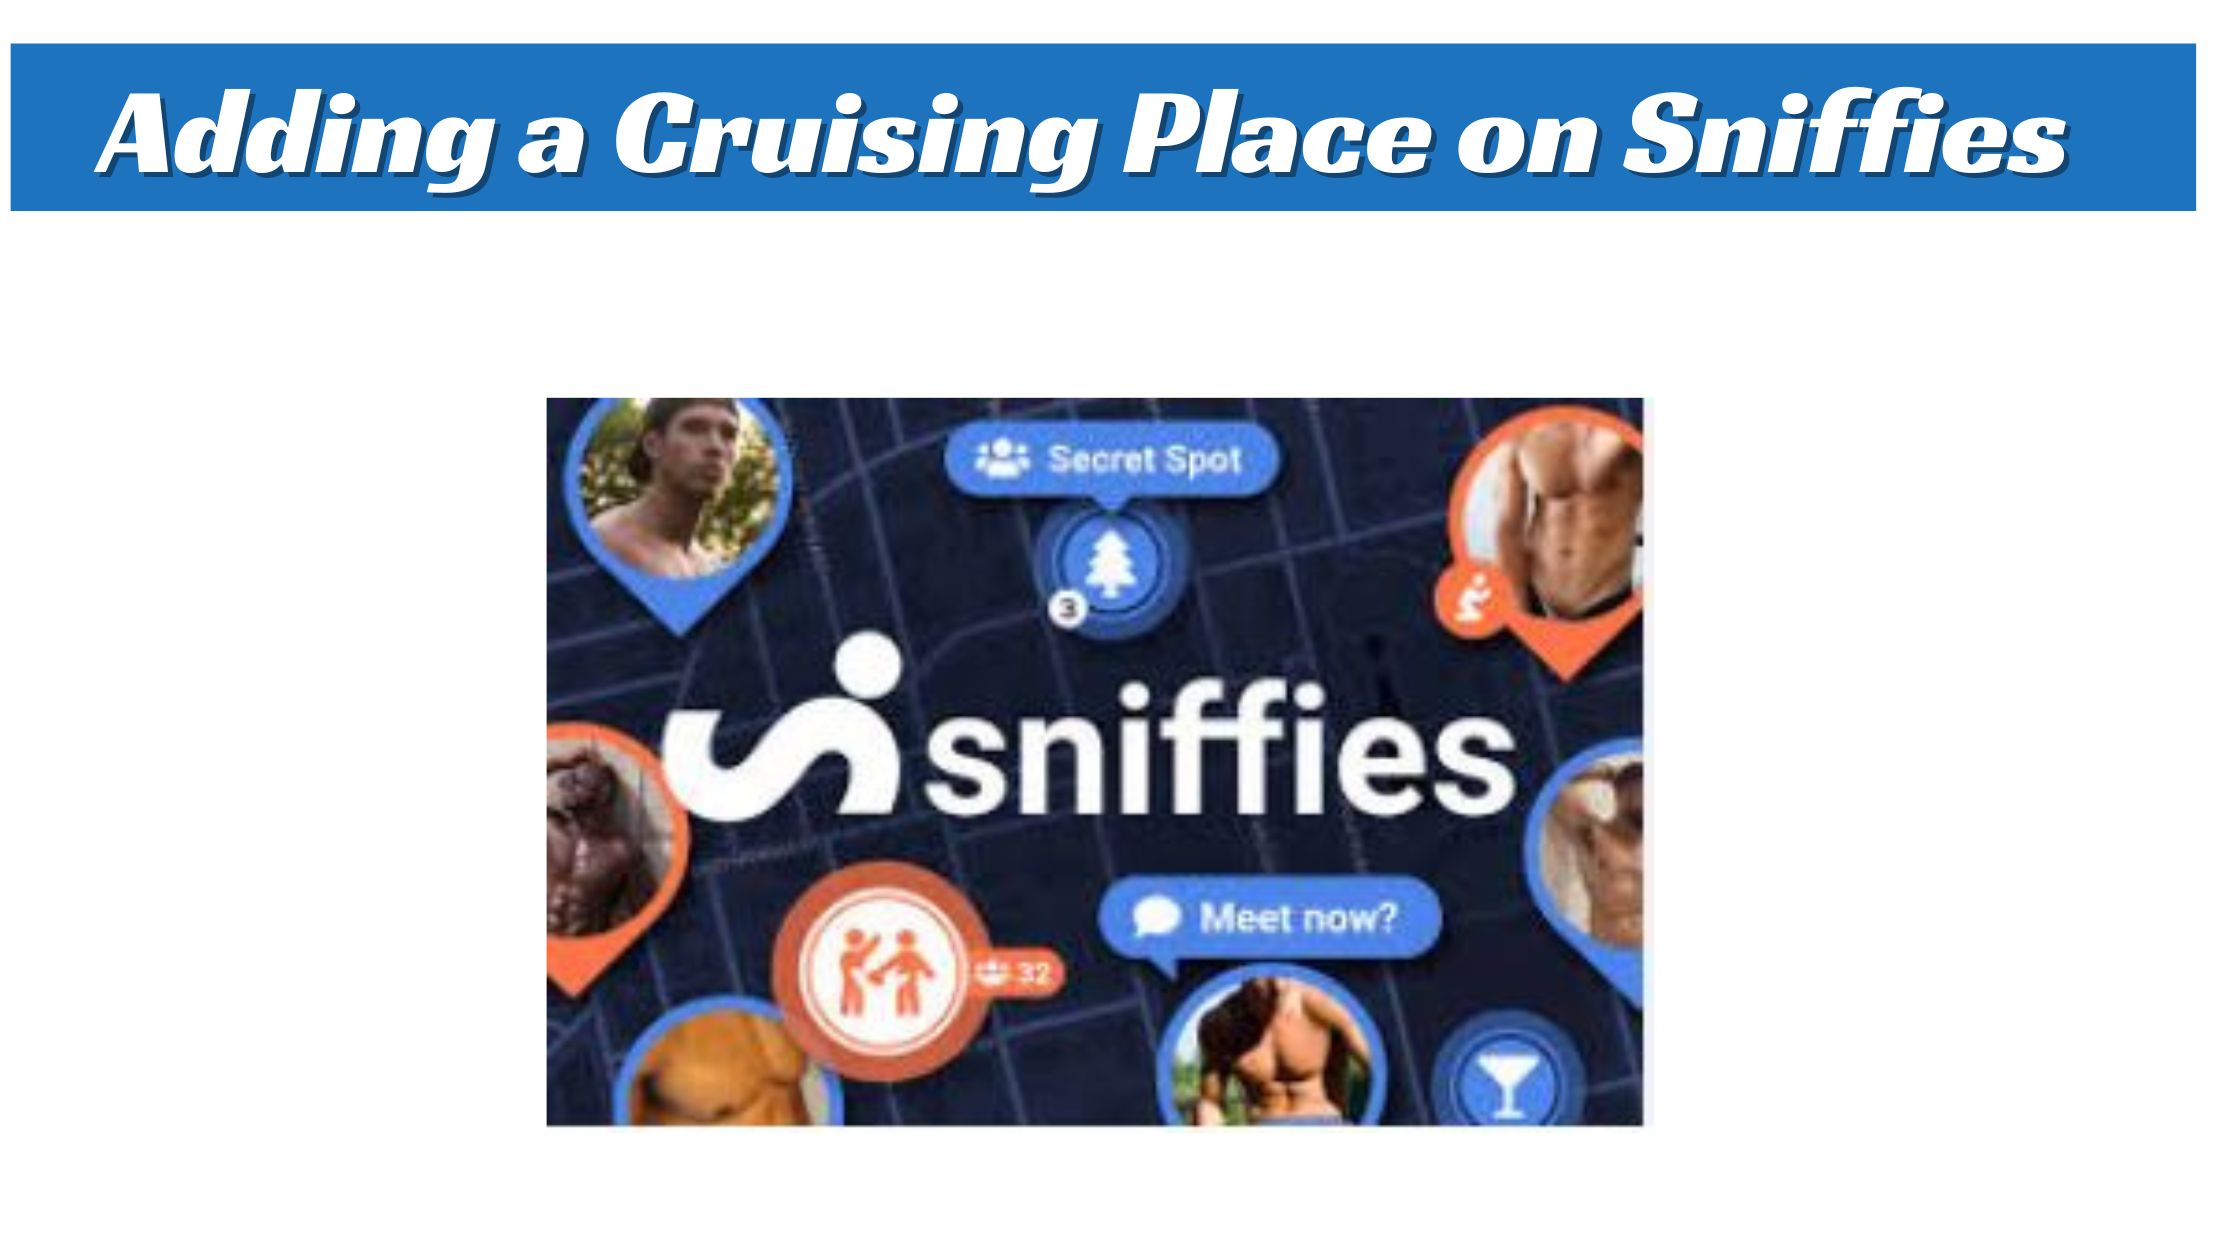 Adding a Cruising Place on Sniffies